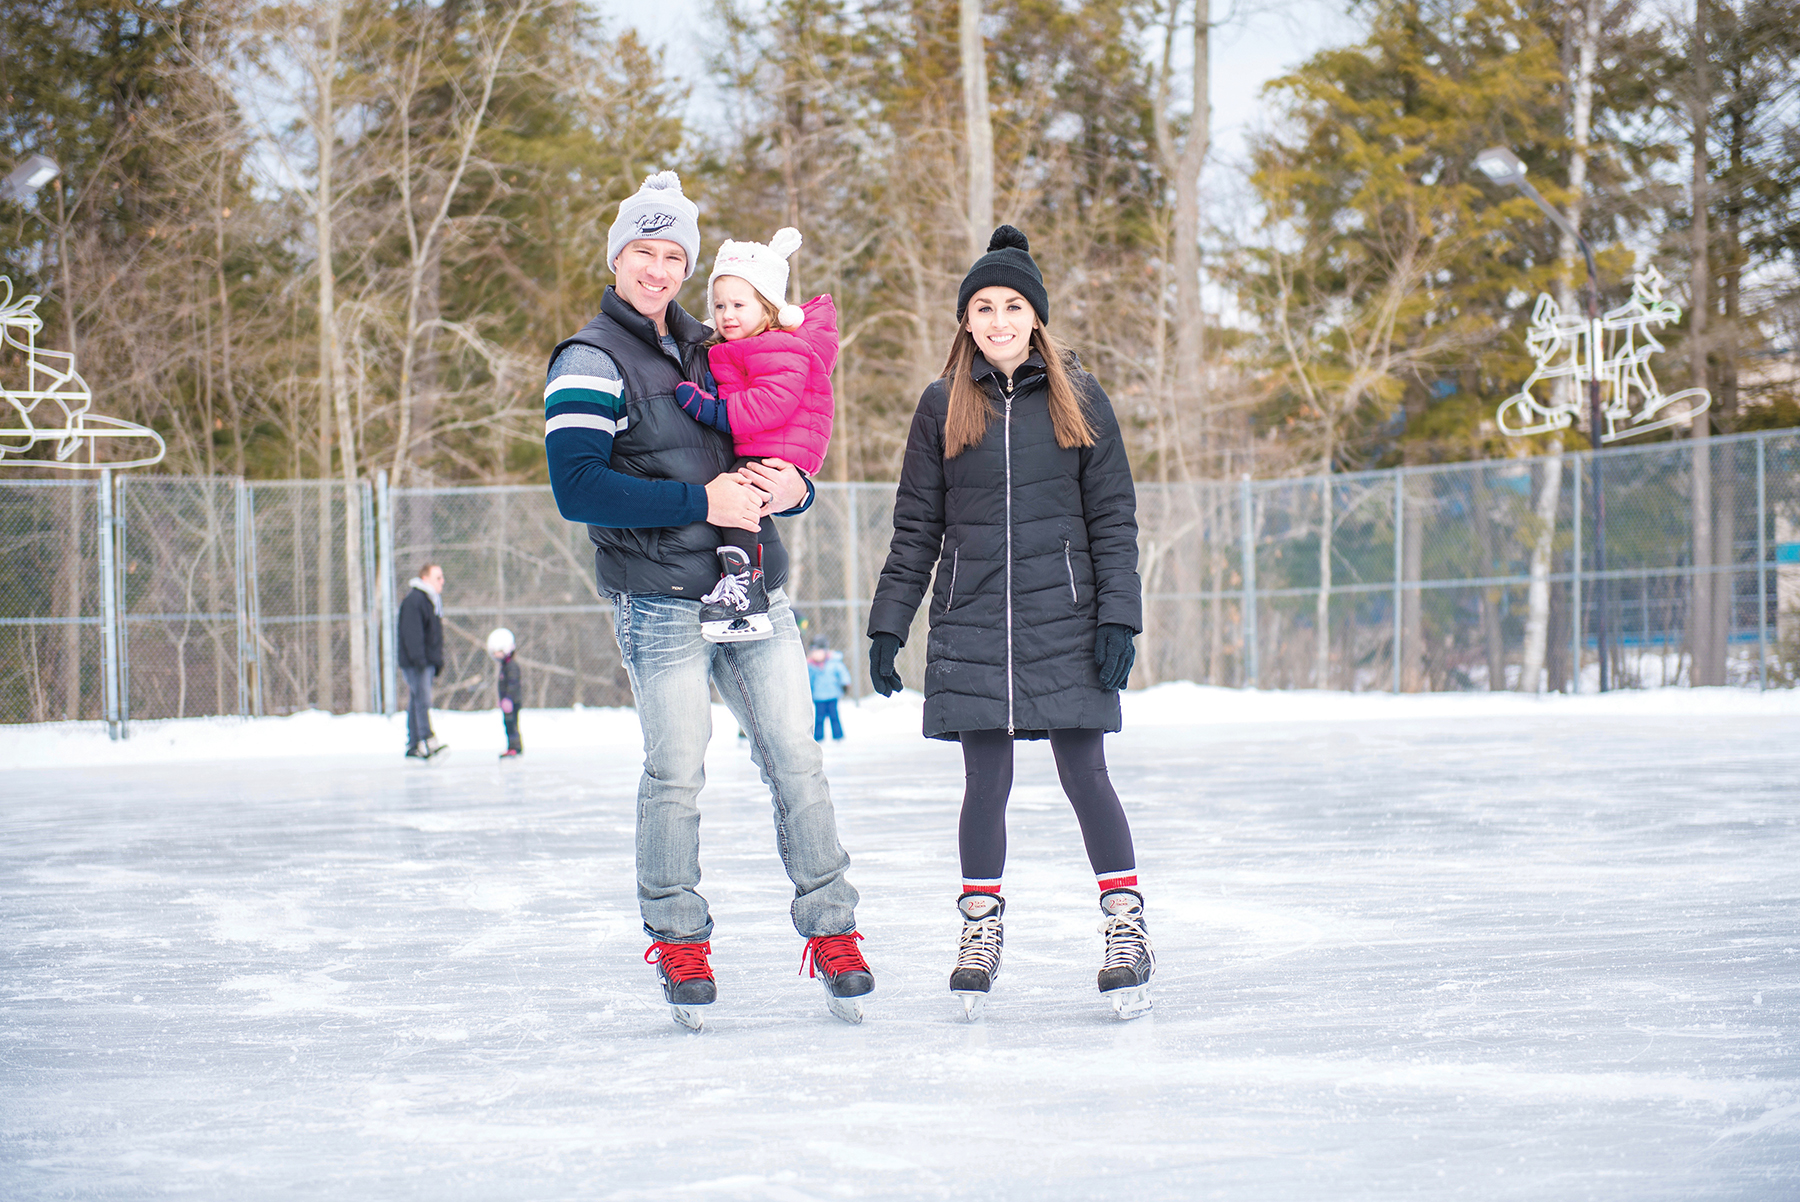 The Oakview Woods Outdoor Complex in Wasaga Beach offers outdoor skating in winter. Jonas and Hilary Deline introduce daughter Stella to the joys of skating.